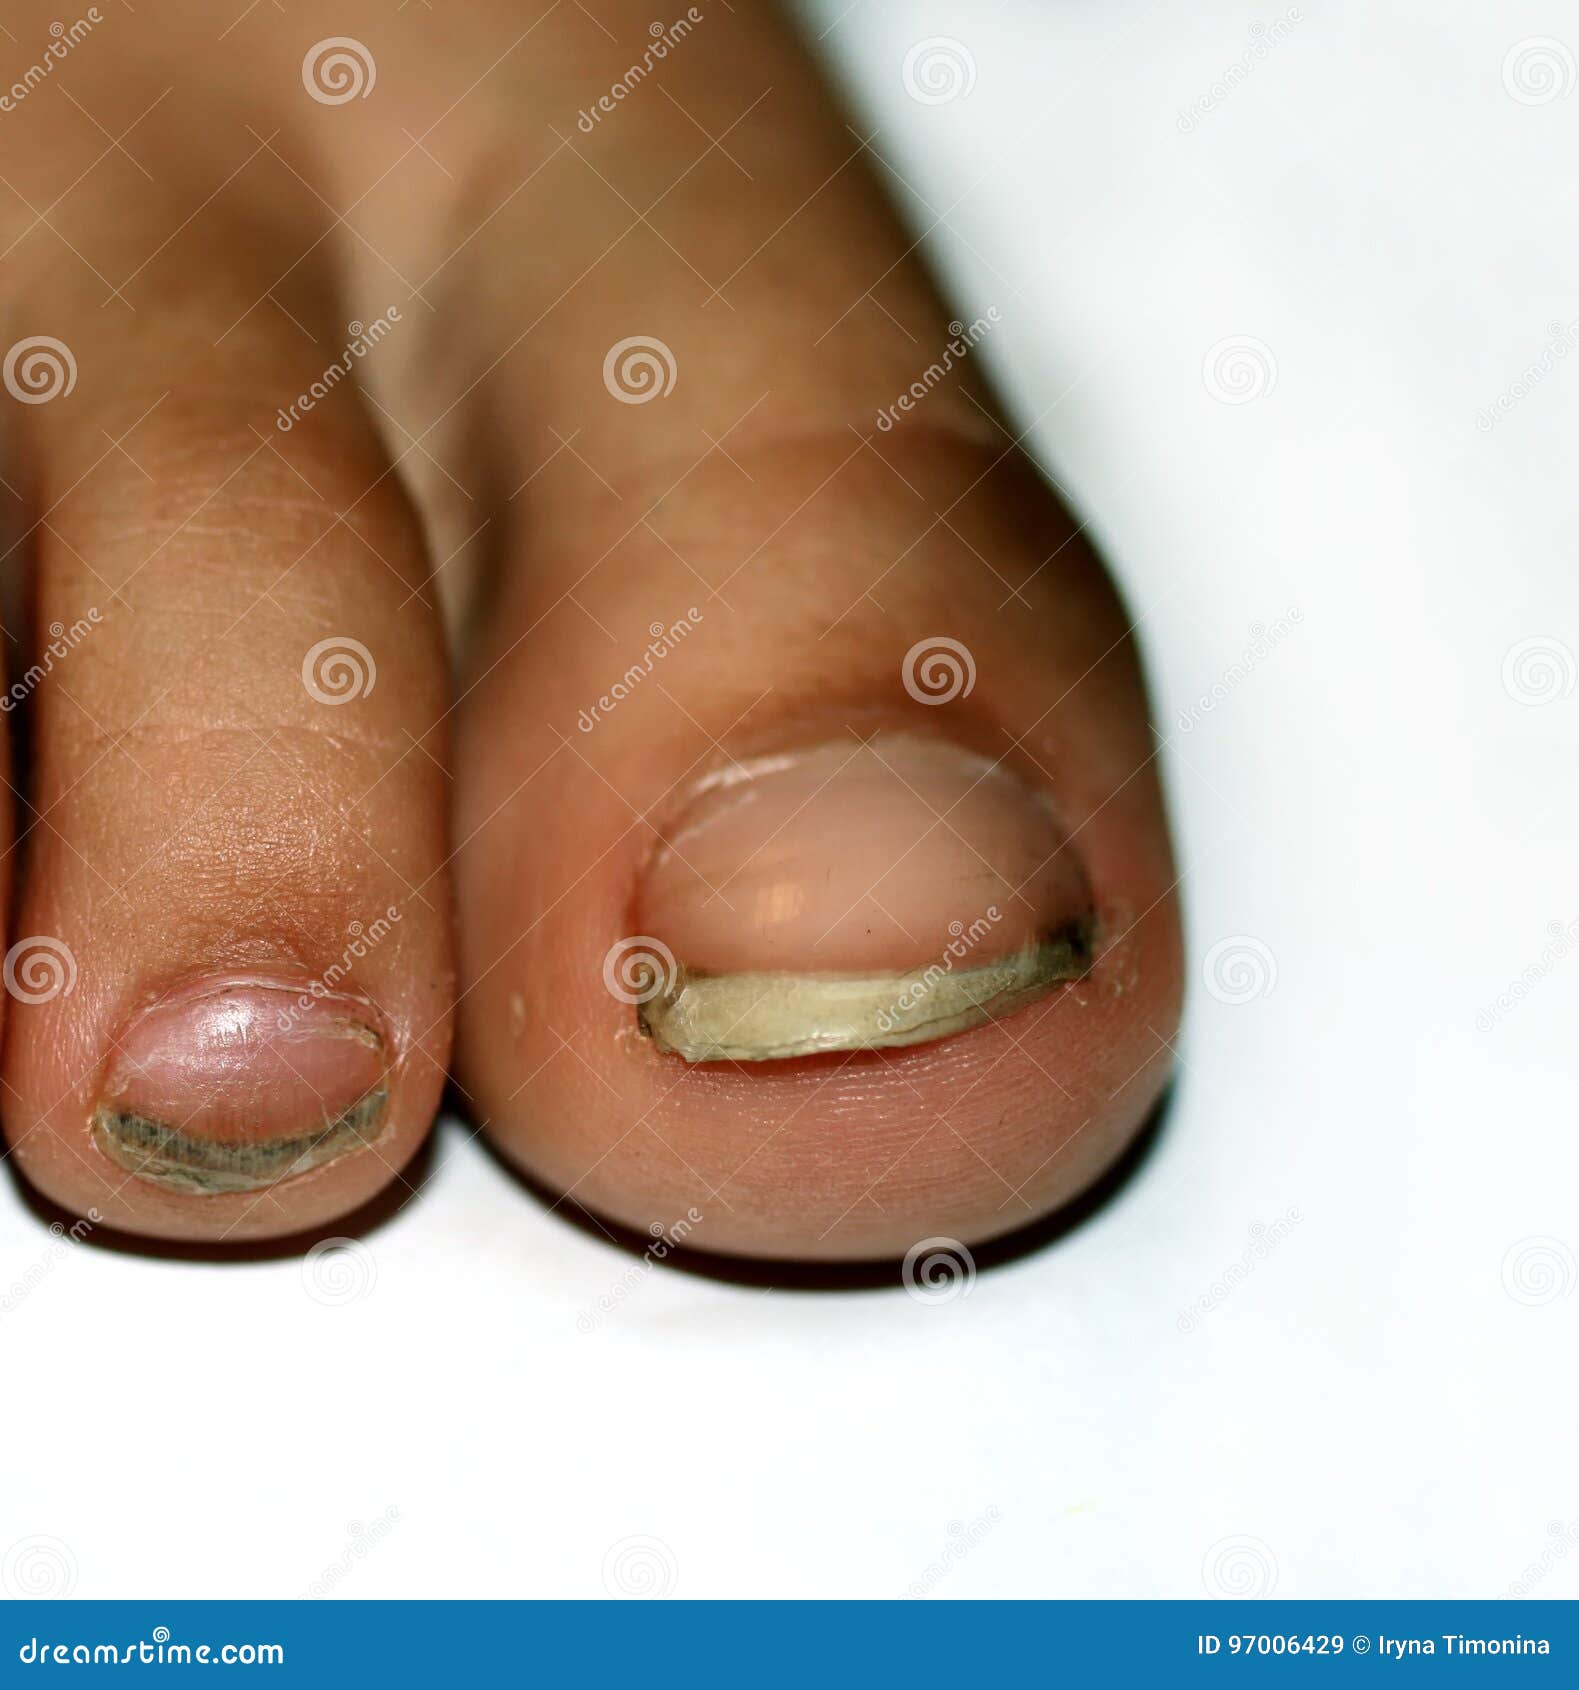 Nails on the Feet, Dirty. Ingrown Toenails. Black Dirty Fingernails. Stock  Image - Image of chinese, deformed: 97006429